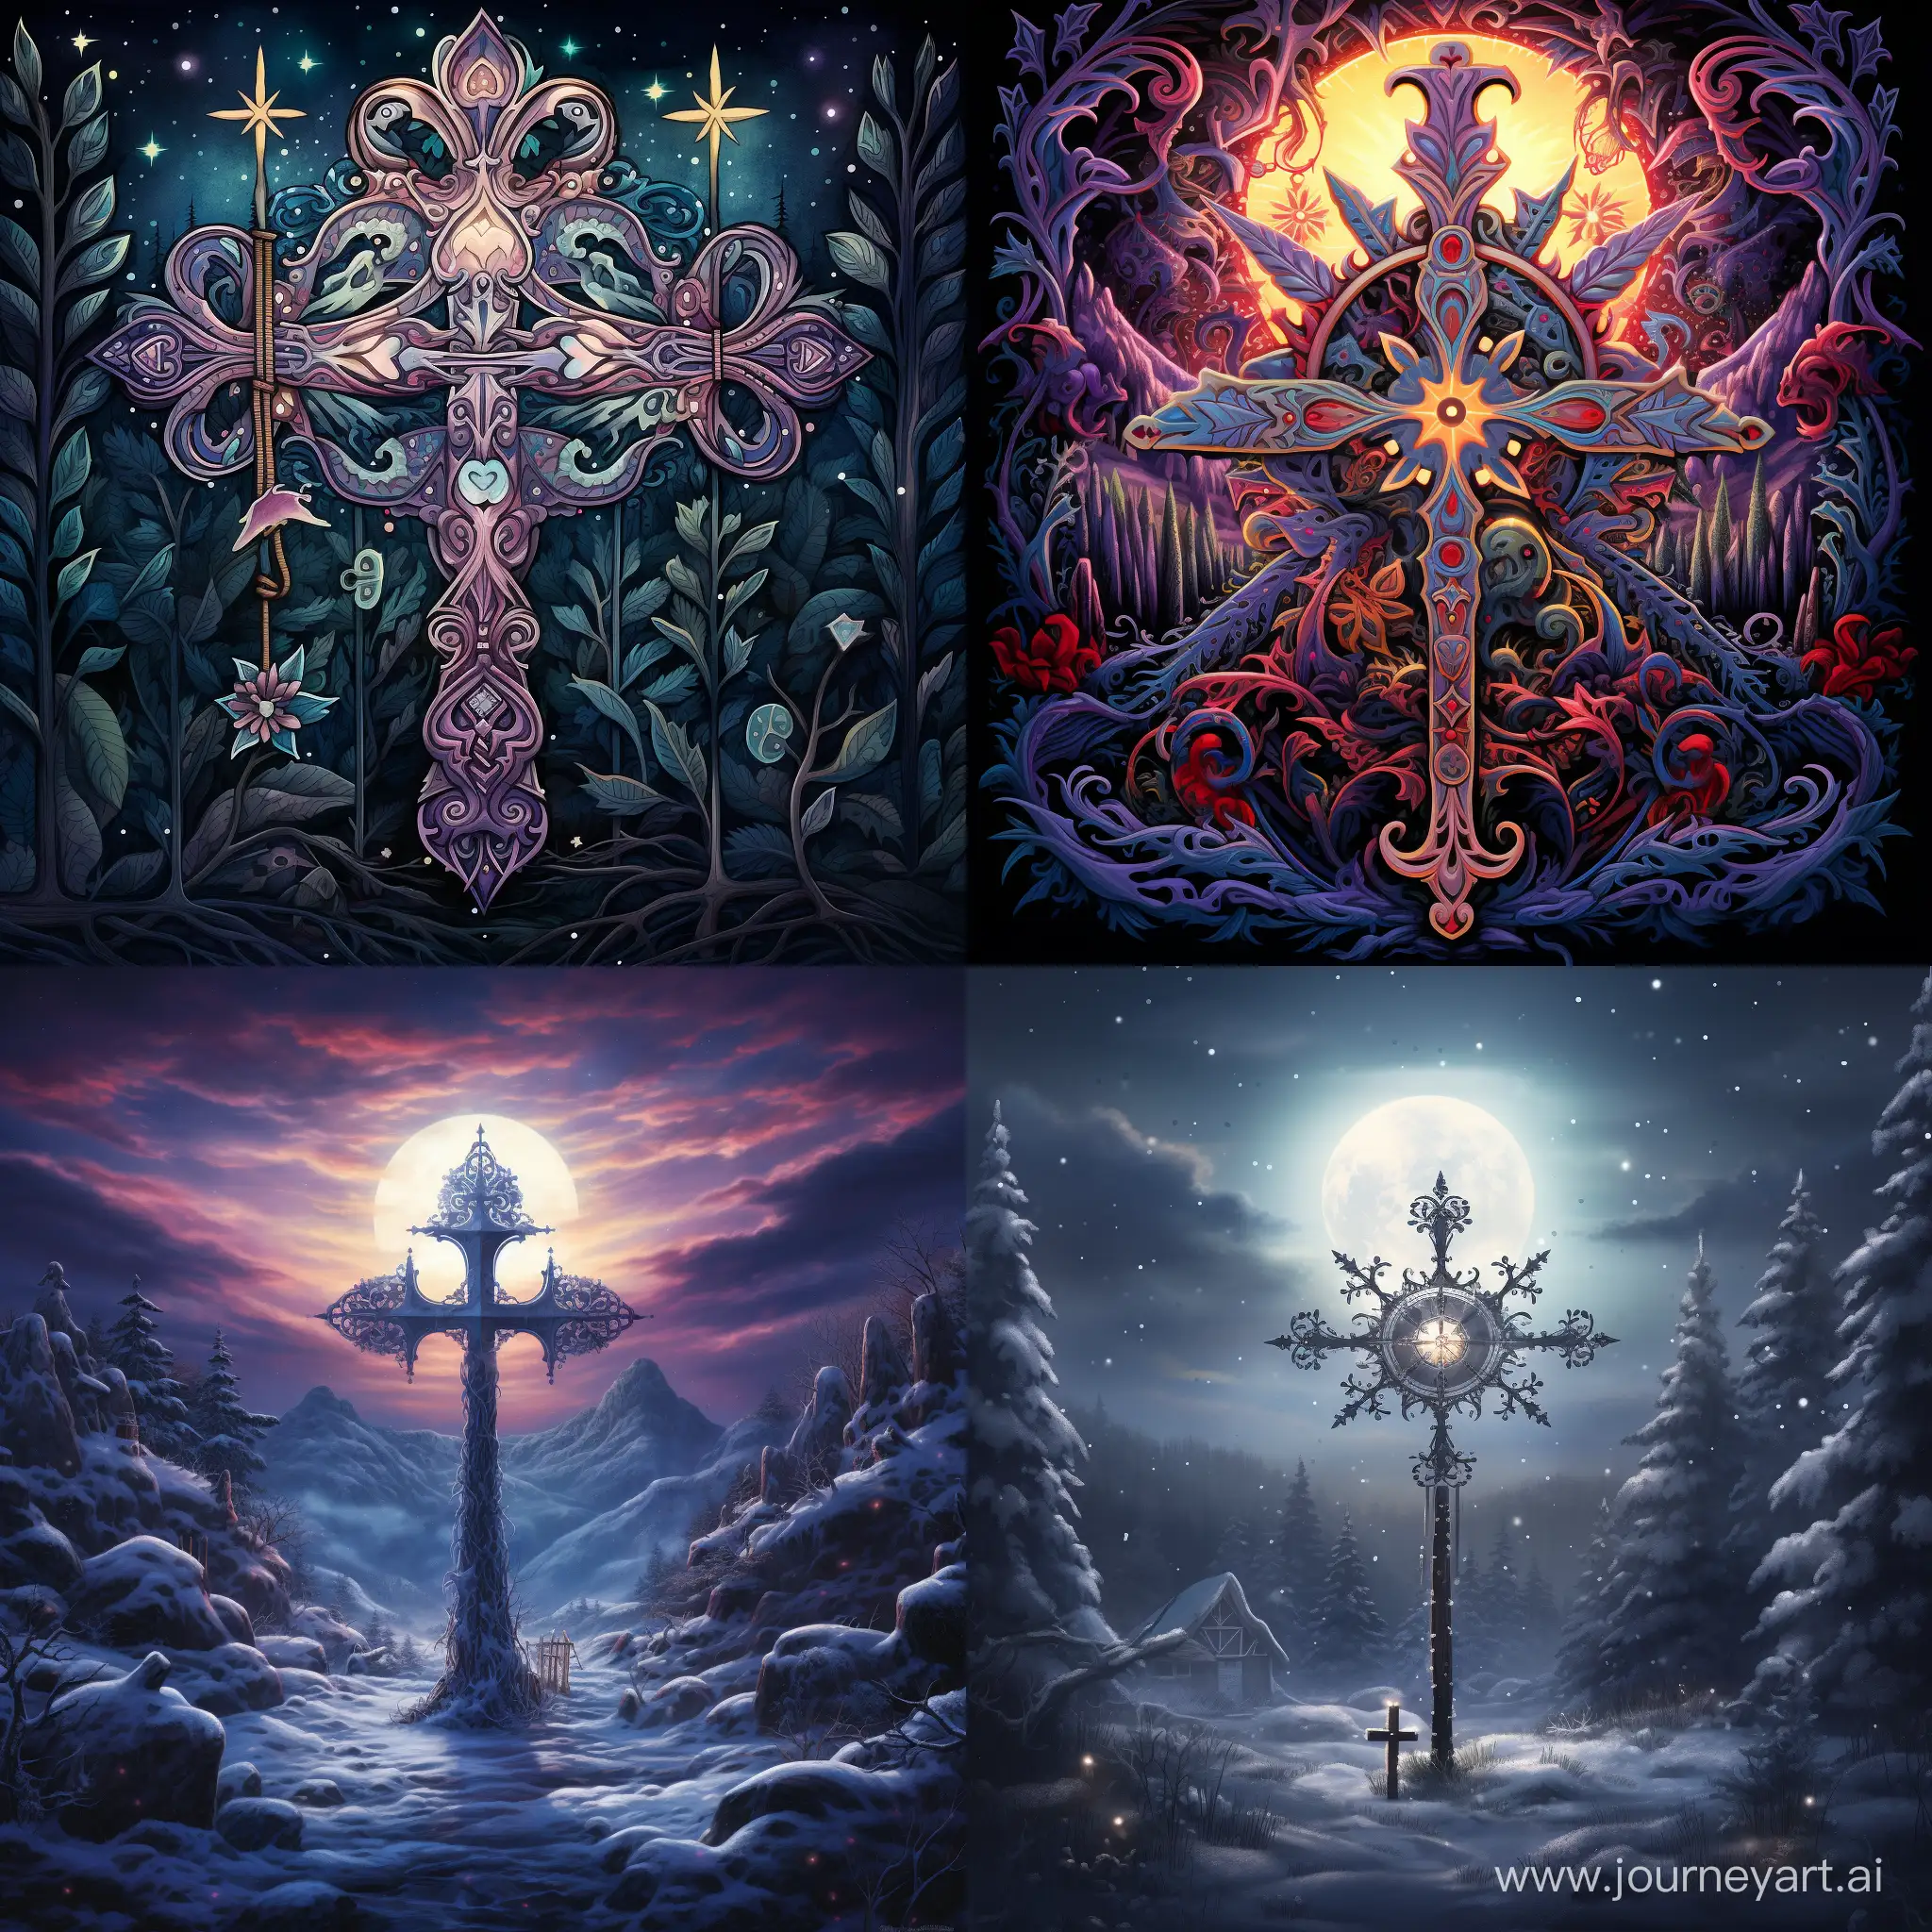 Majestic-Advent-Cross-Illuminated-in-a-Radiant-Display